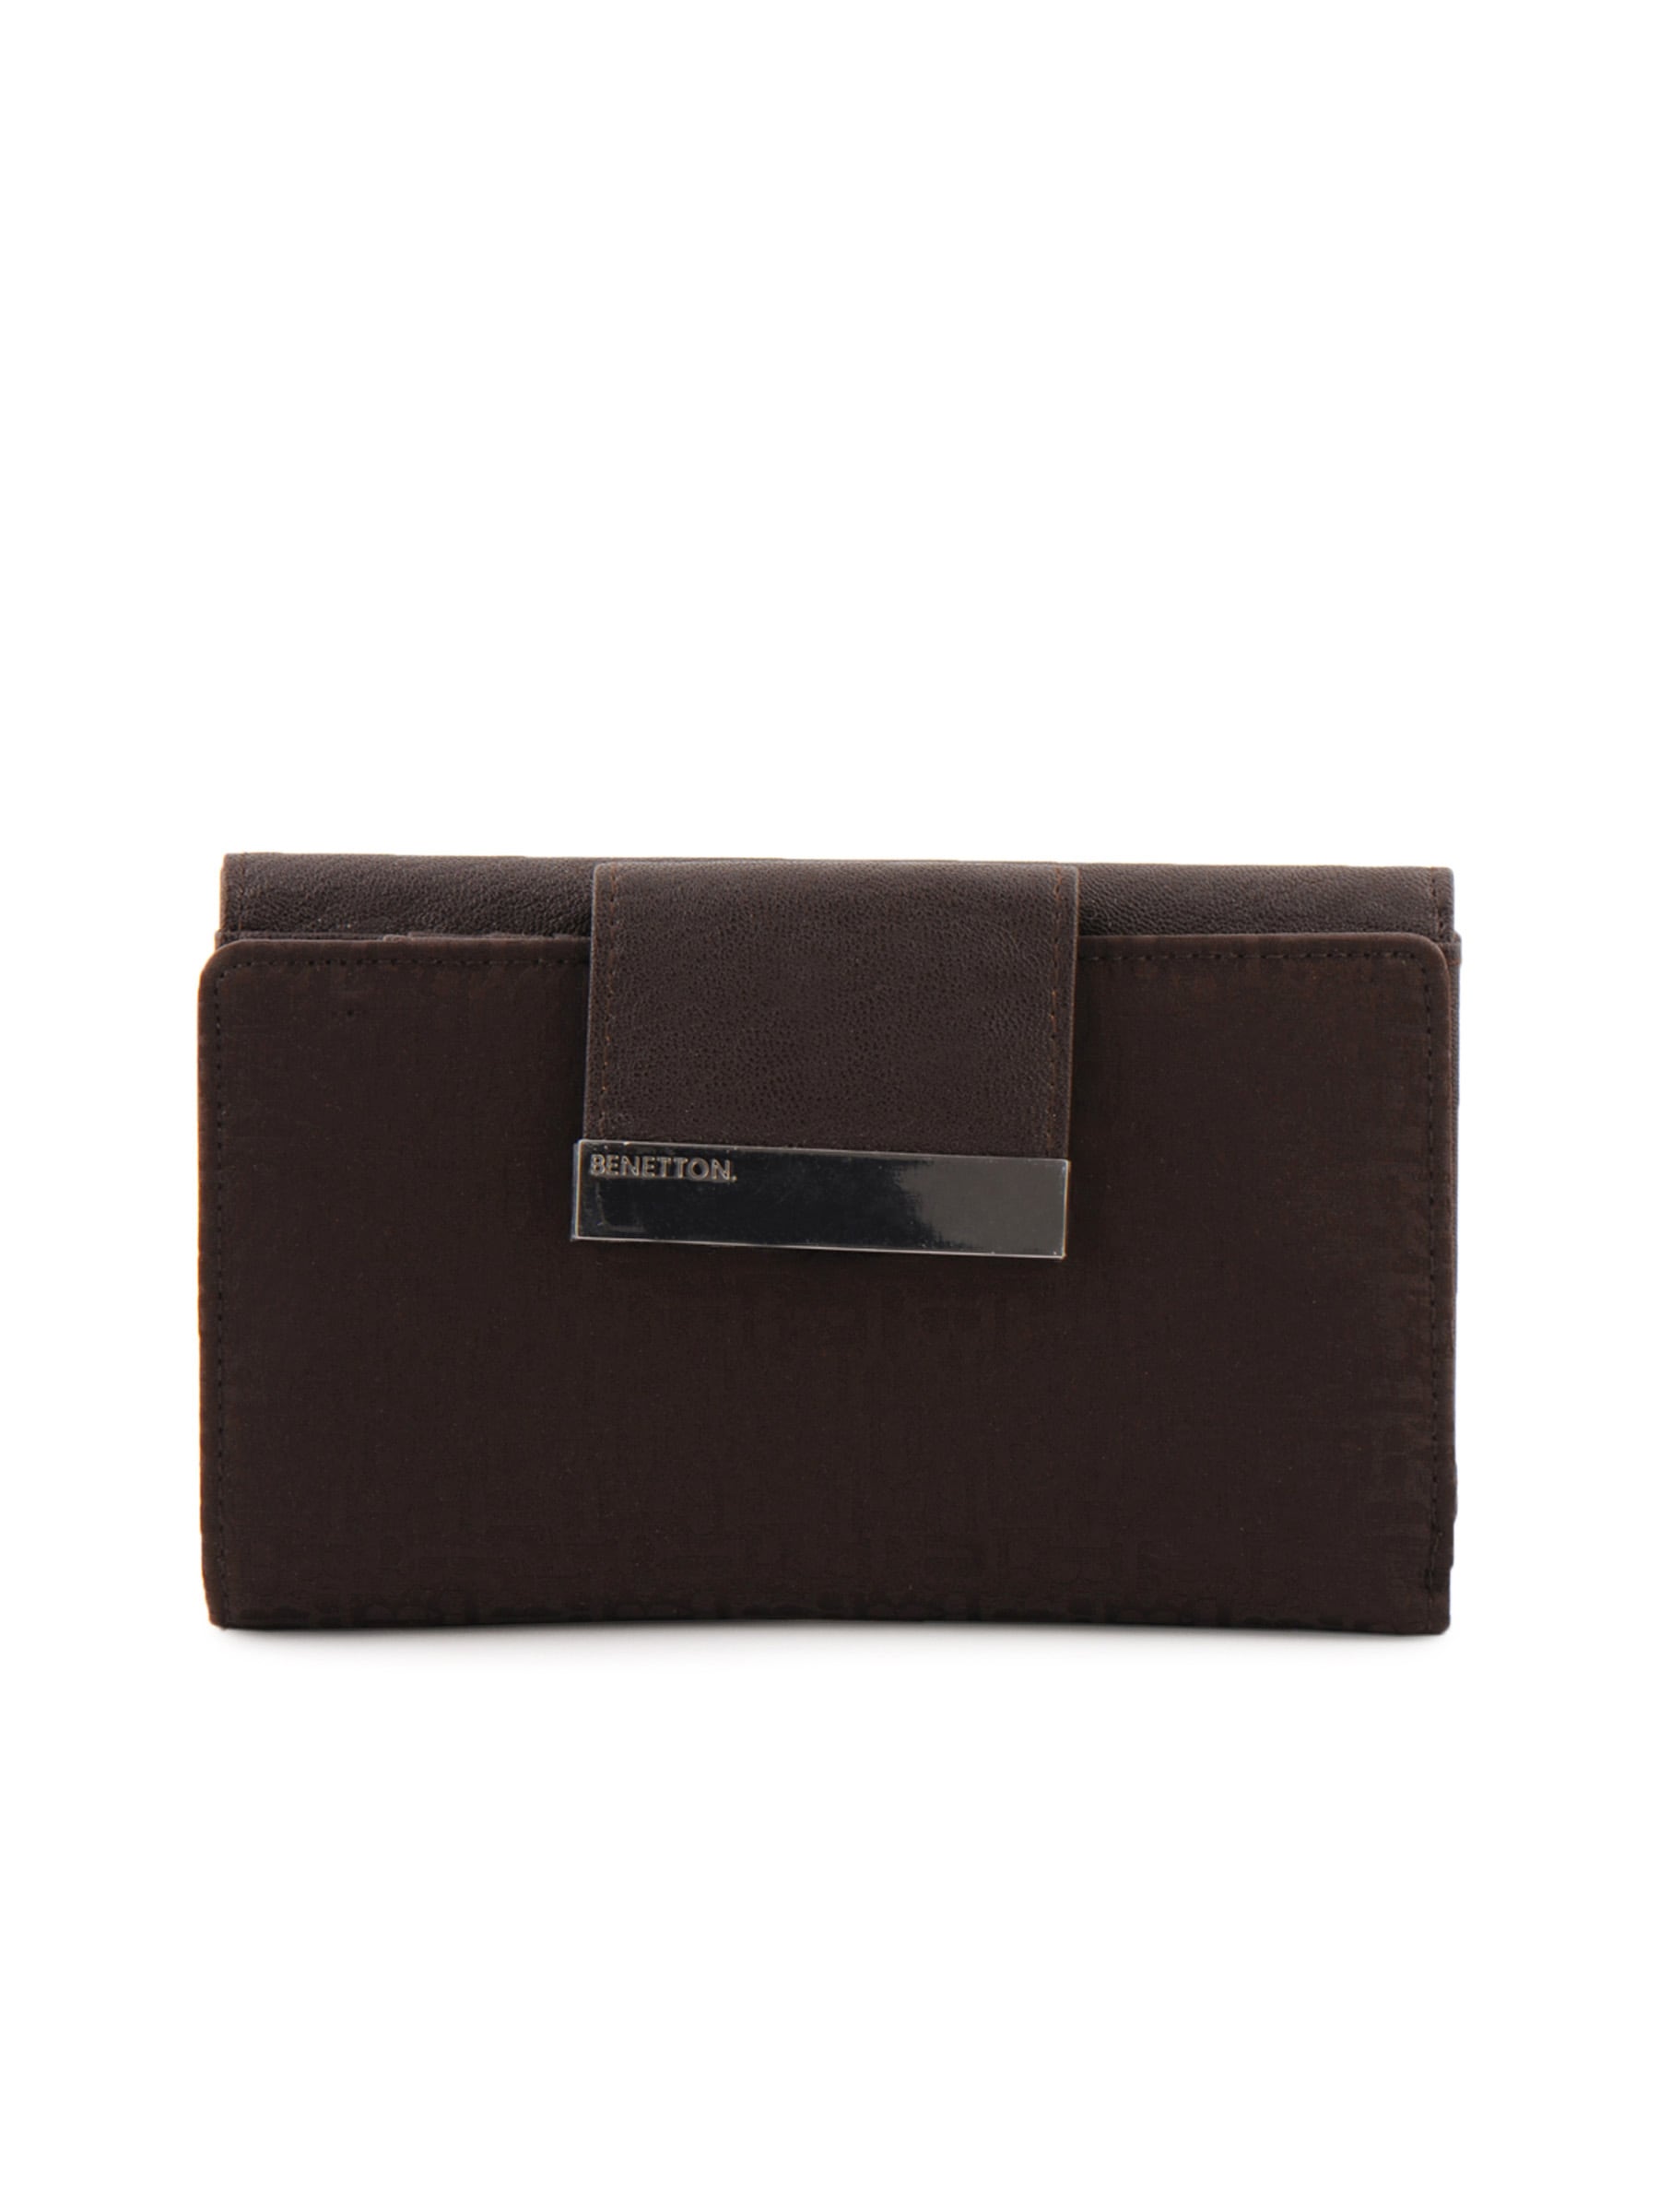 United Colors of Benetton Women Solid Coffee Brown Wallets